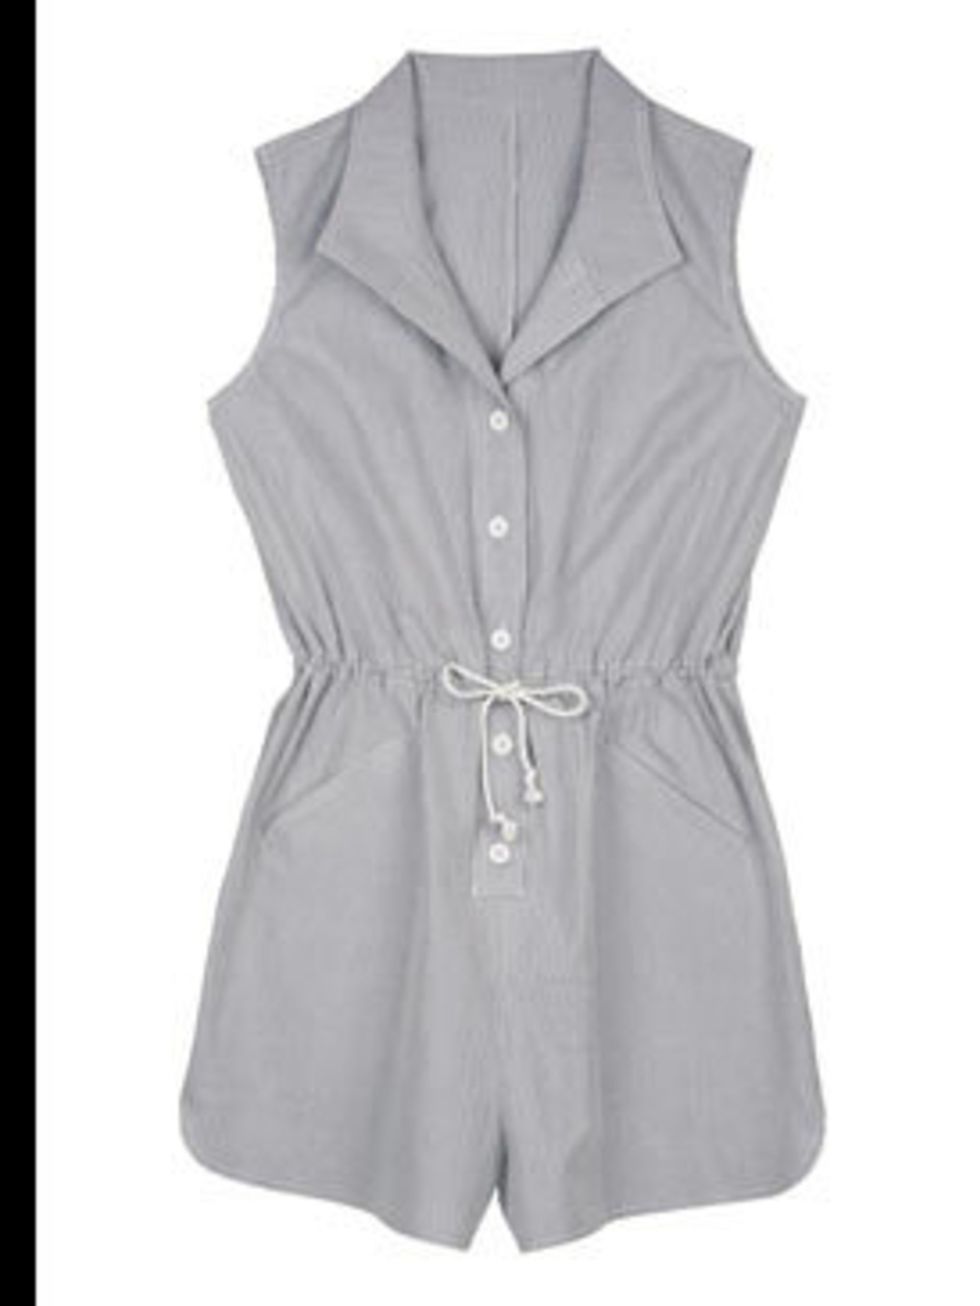 <p>Playsuit, £45 by <a href="http://www.urbanoutfitters.co.uk/page/home">Urban Outfitters</a></p>